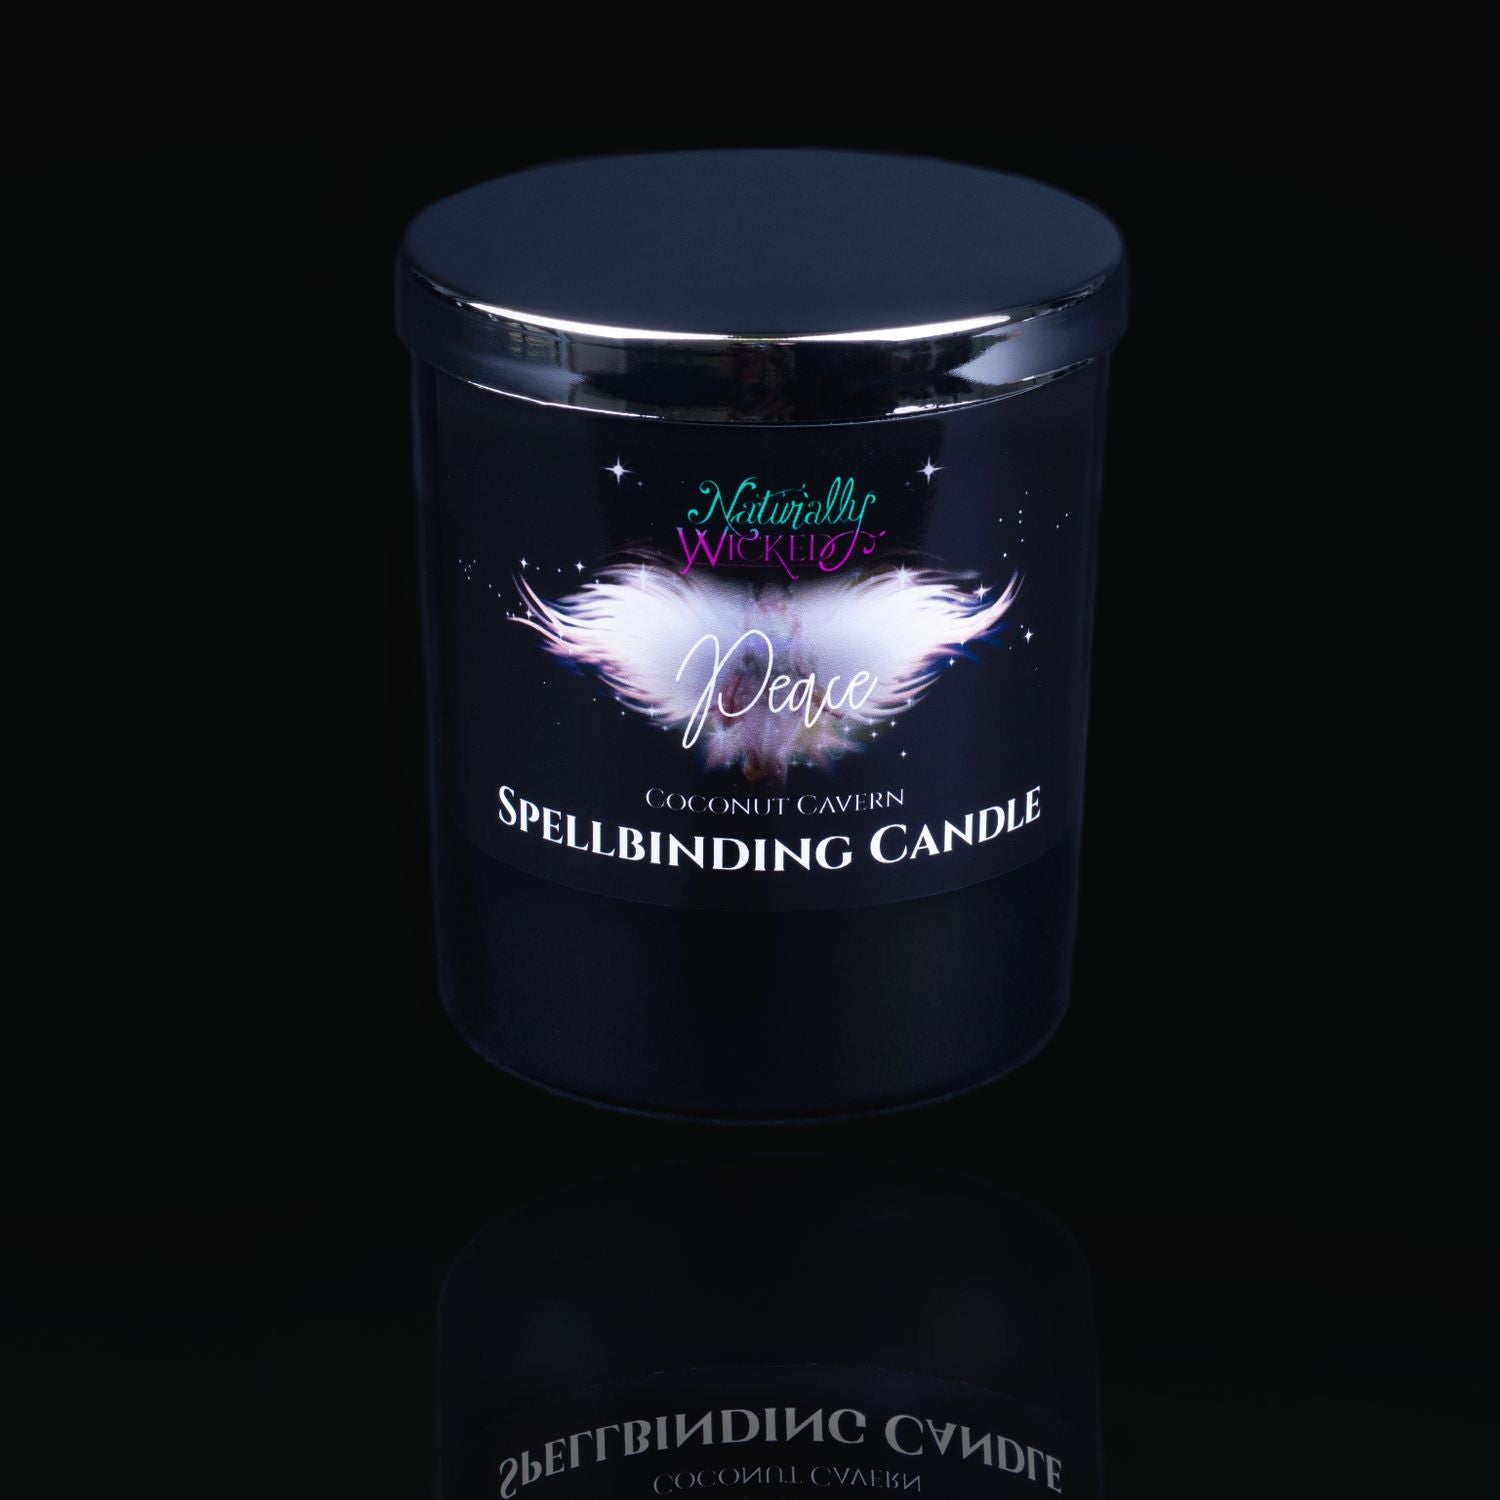 Naturally Wicked Spellbinding Peace Spell Candle With Mirror Finished Exquisite Lid In Place. Featuring A Black Gloss Label And A Beautiful Angel Of Peace